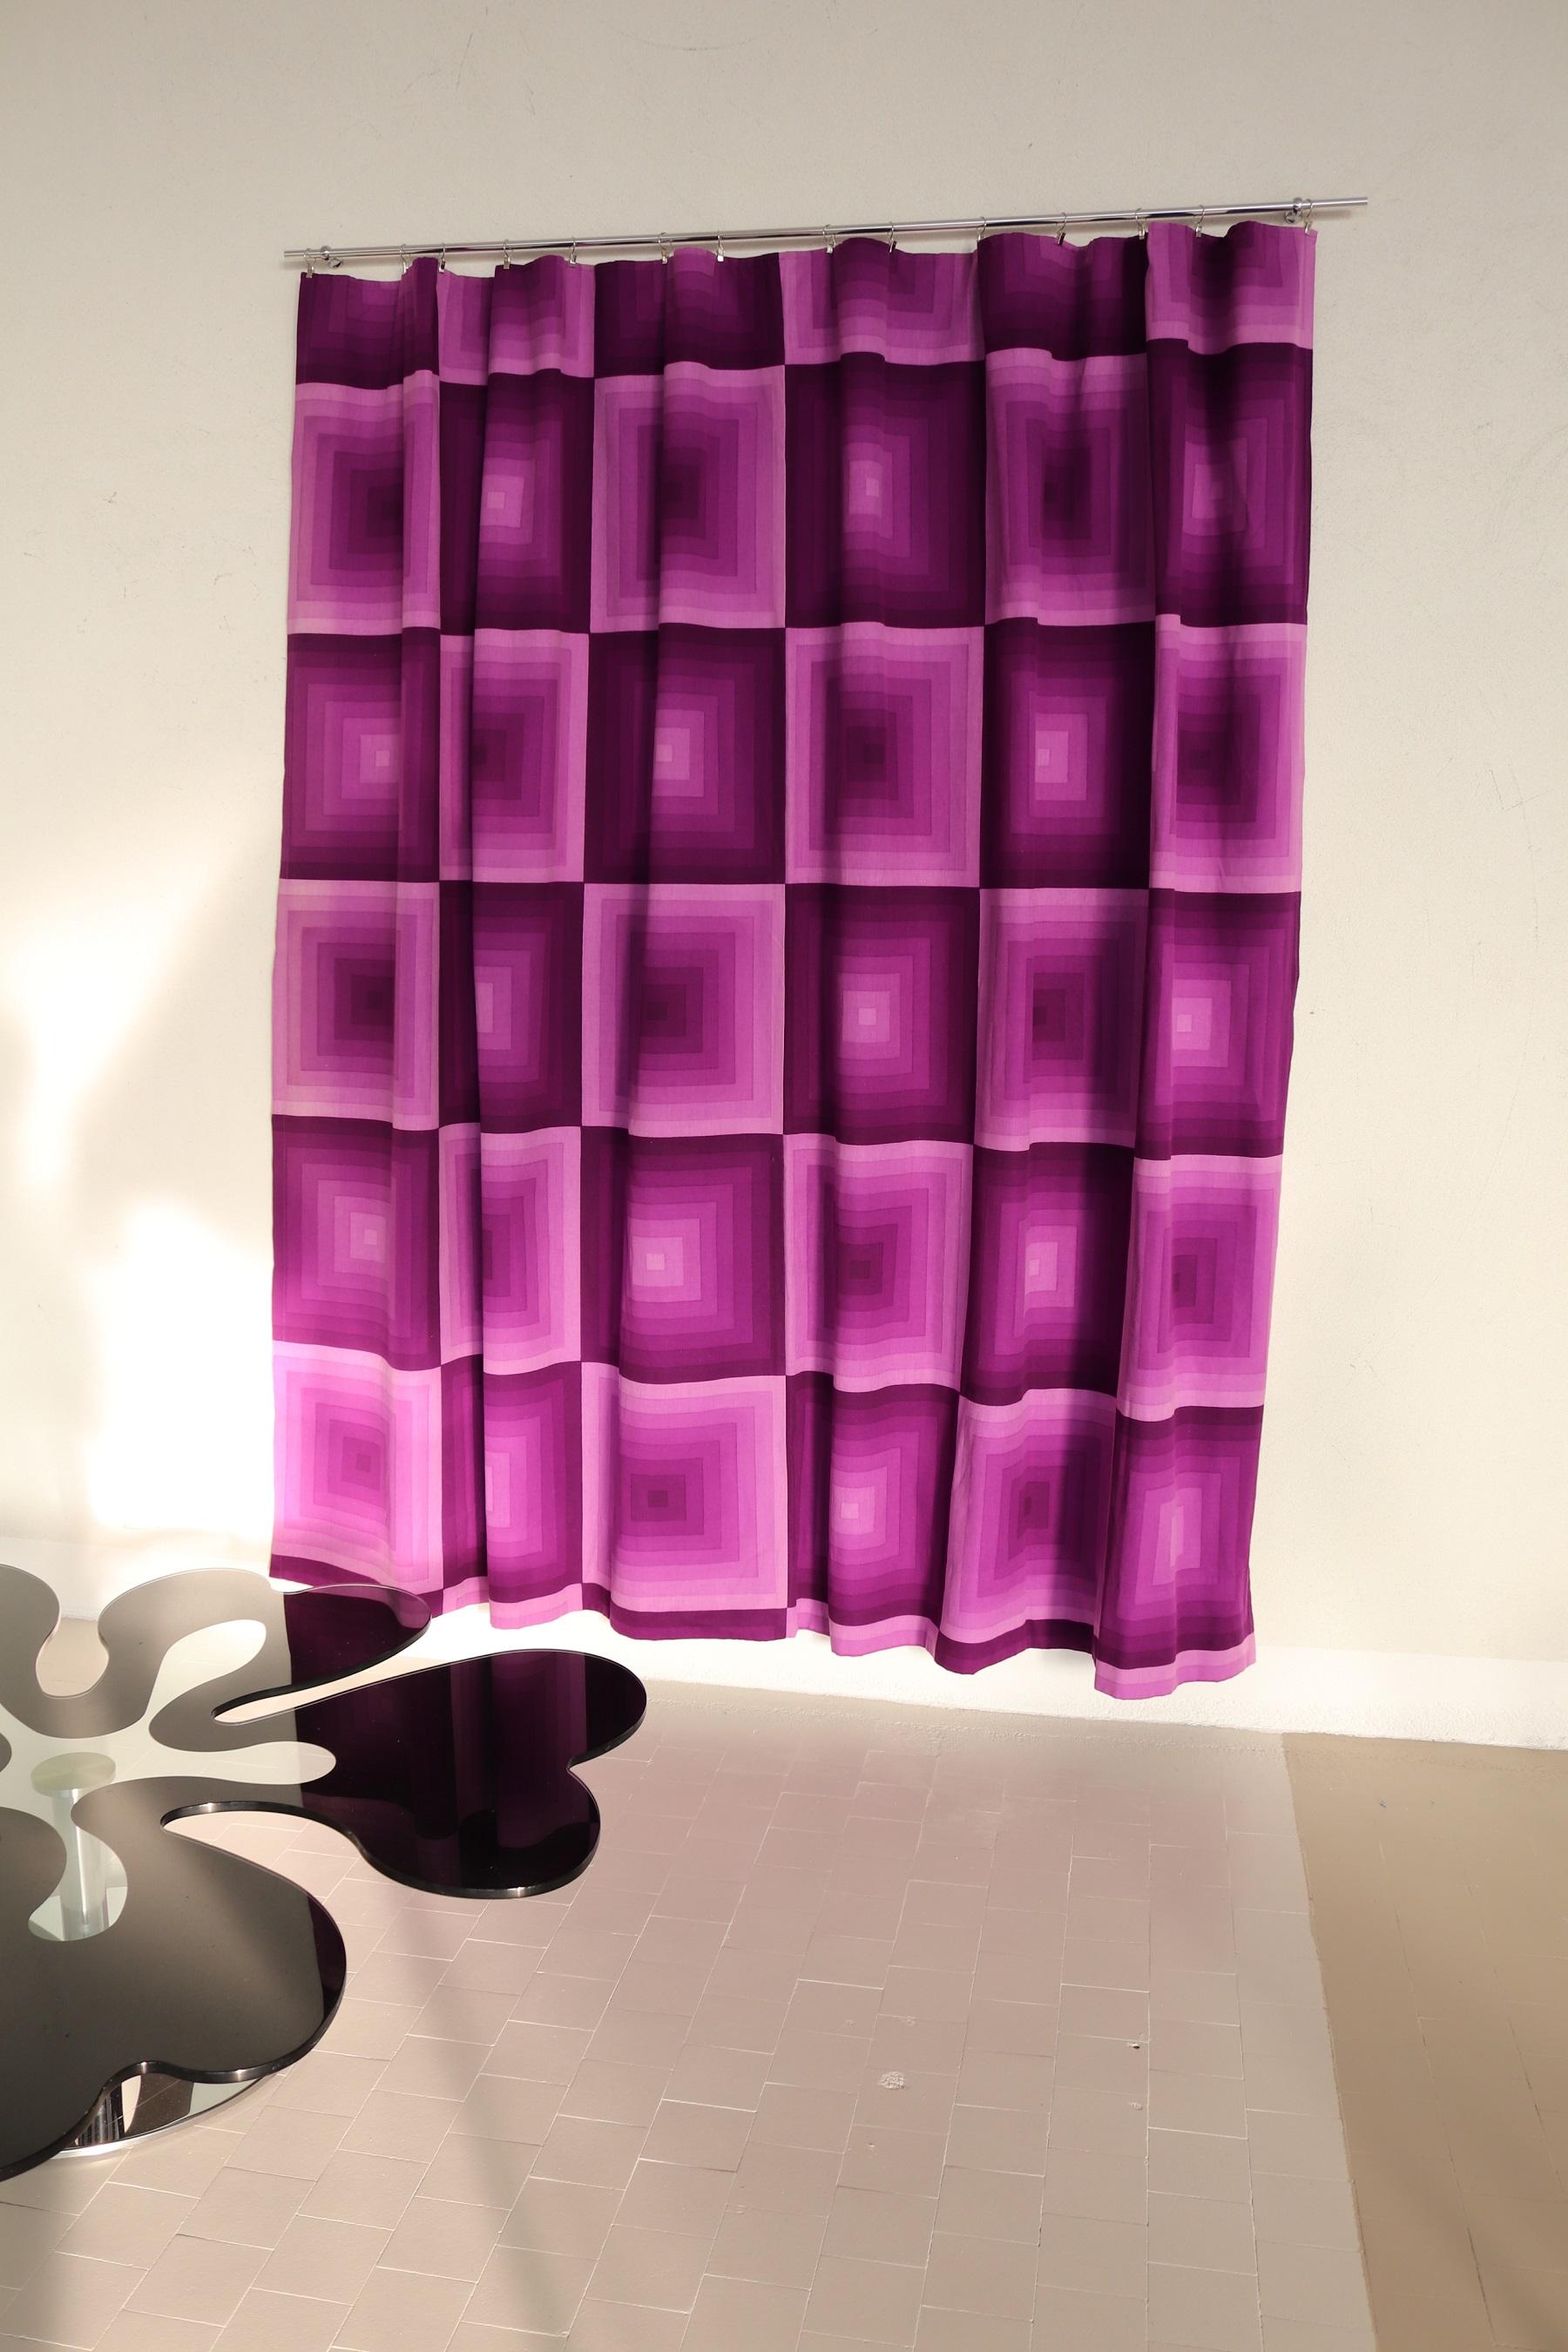 Swiss Verner Panton Curtain Panel, Tapestry, Fabric by Mira-X Collection, 1960s